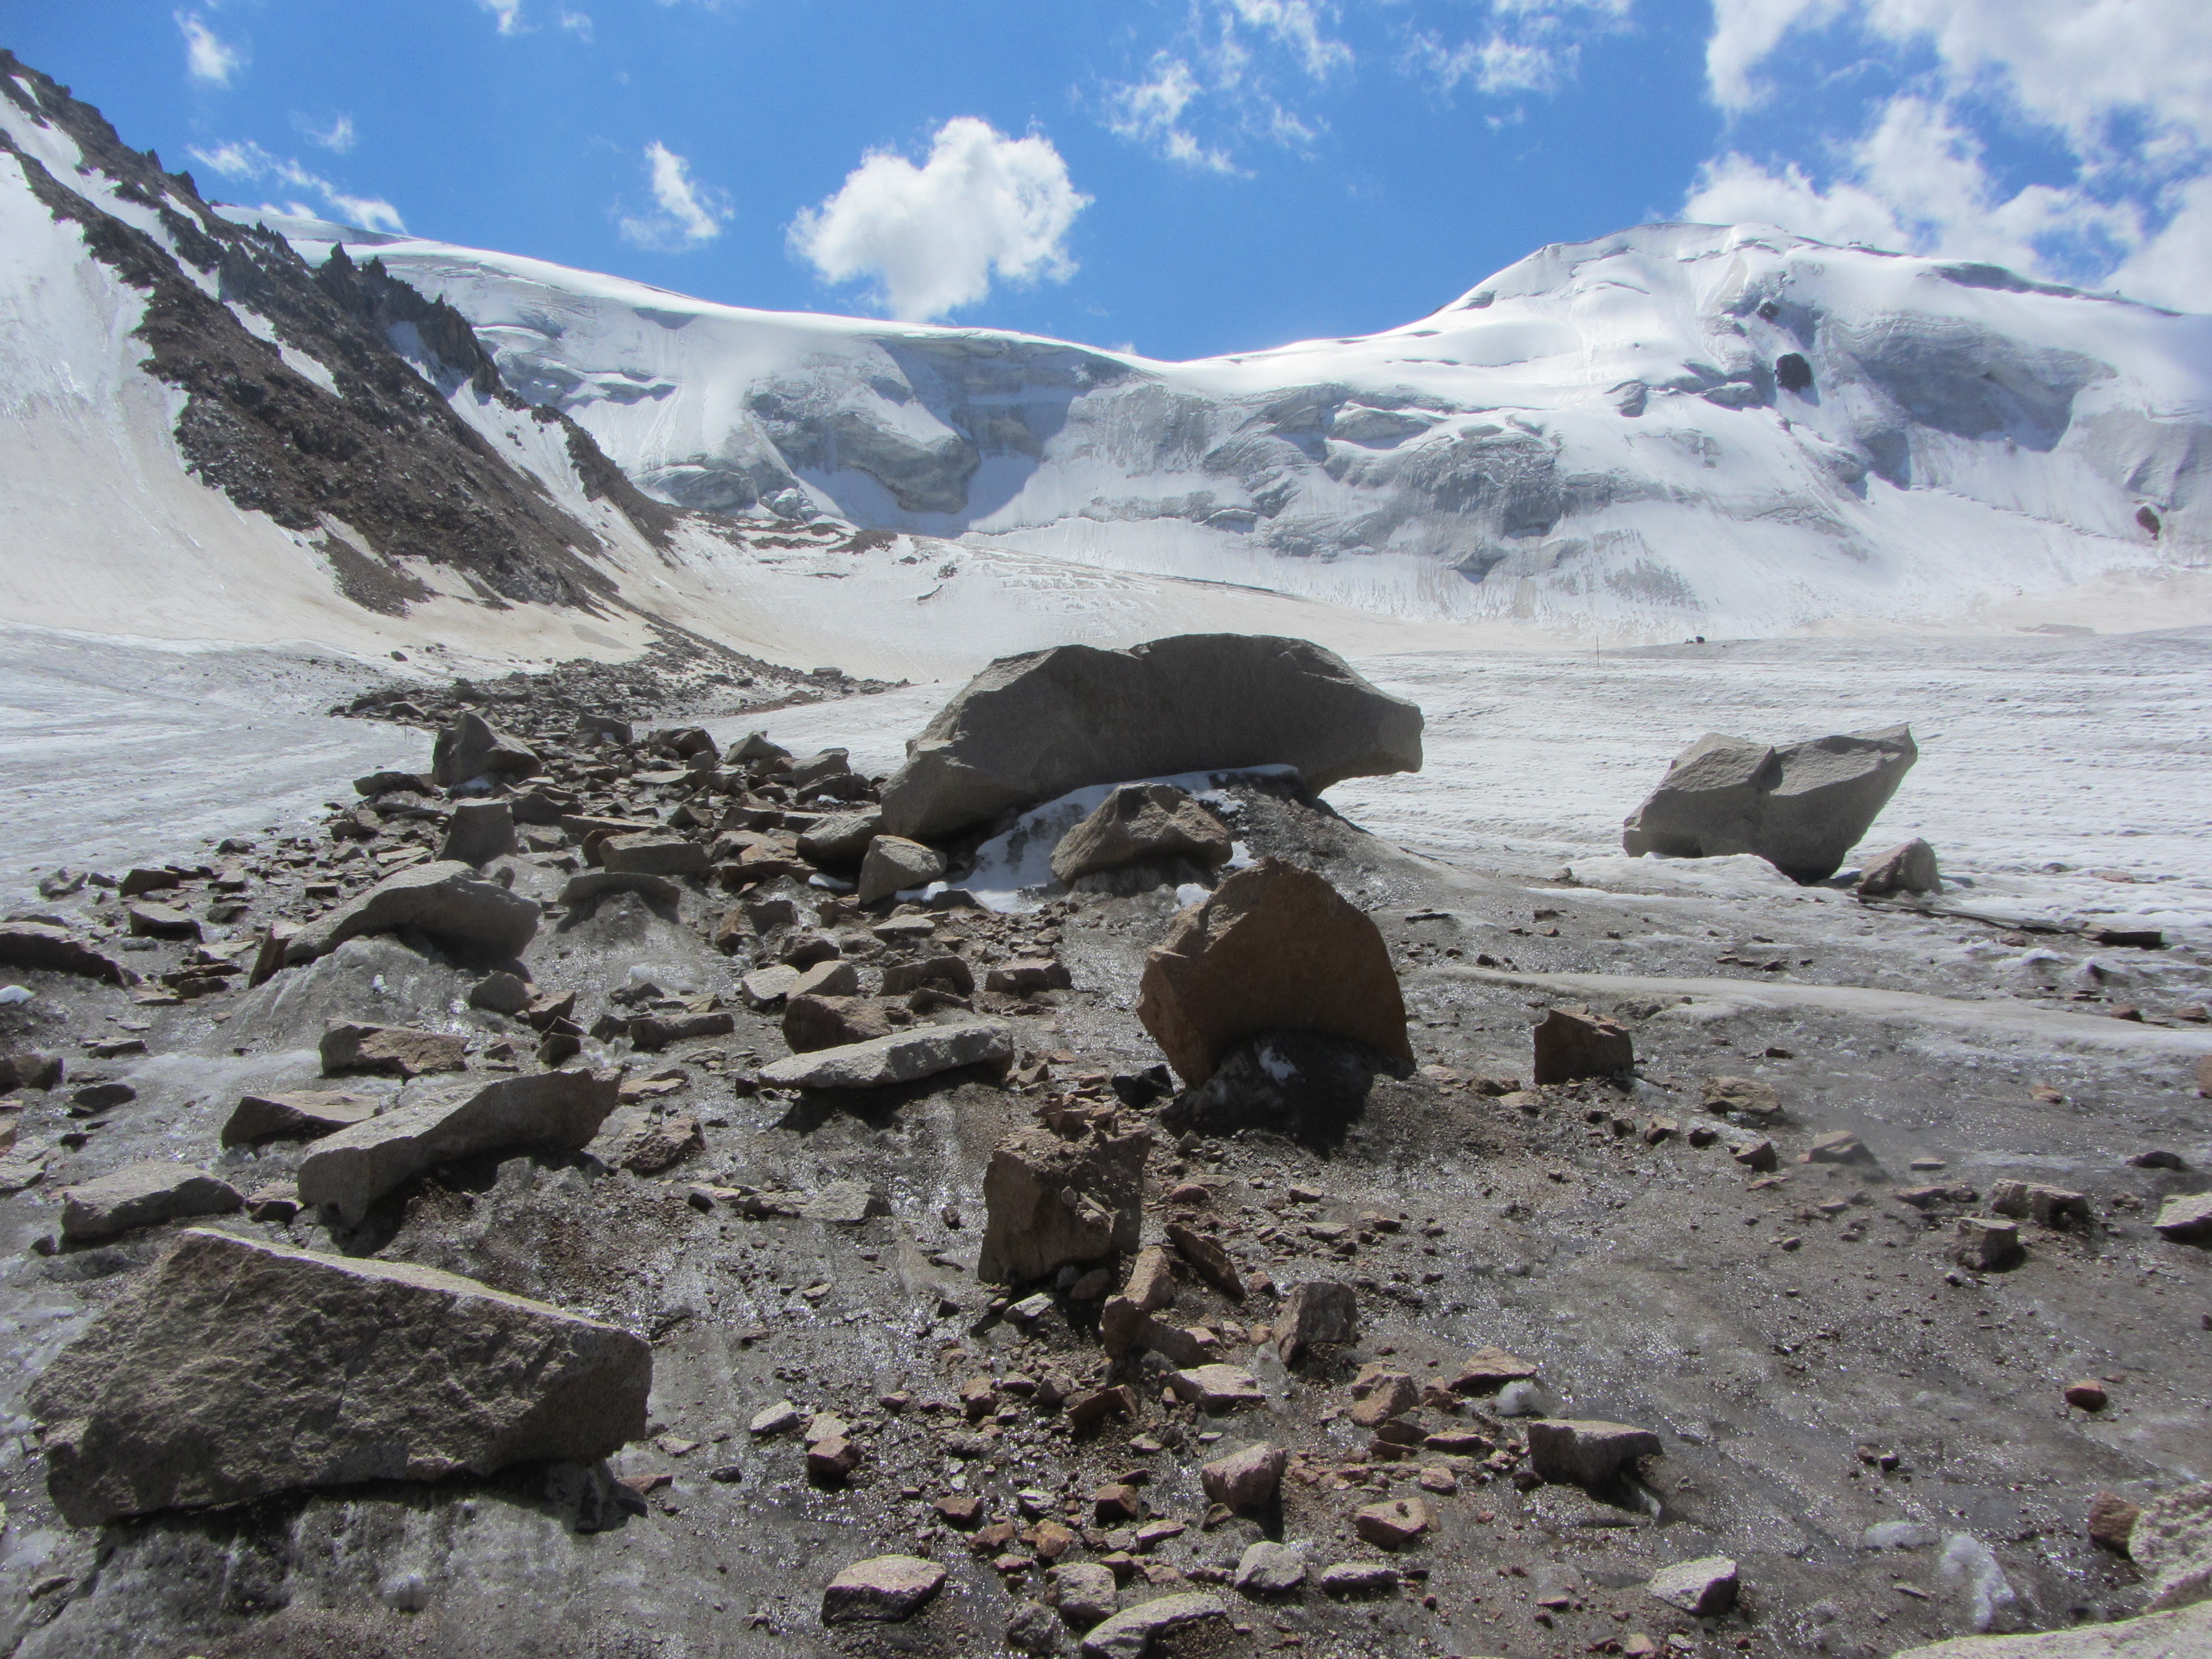 Retreating glaciers: the science behind the story